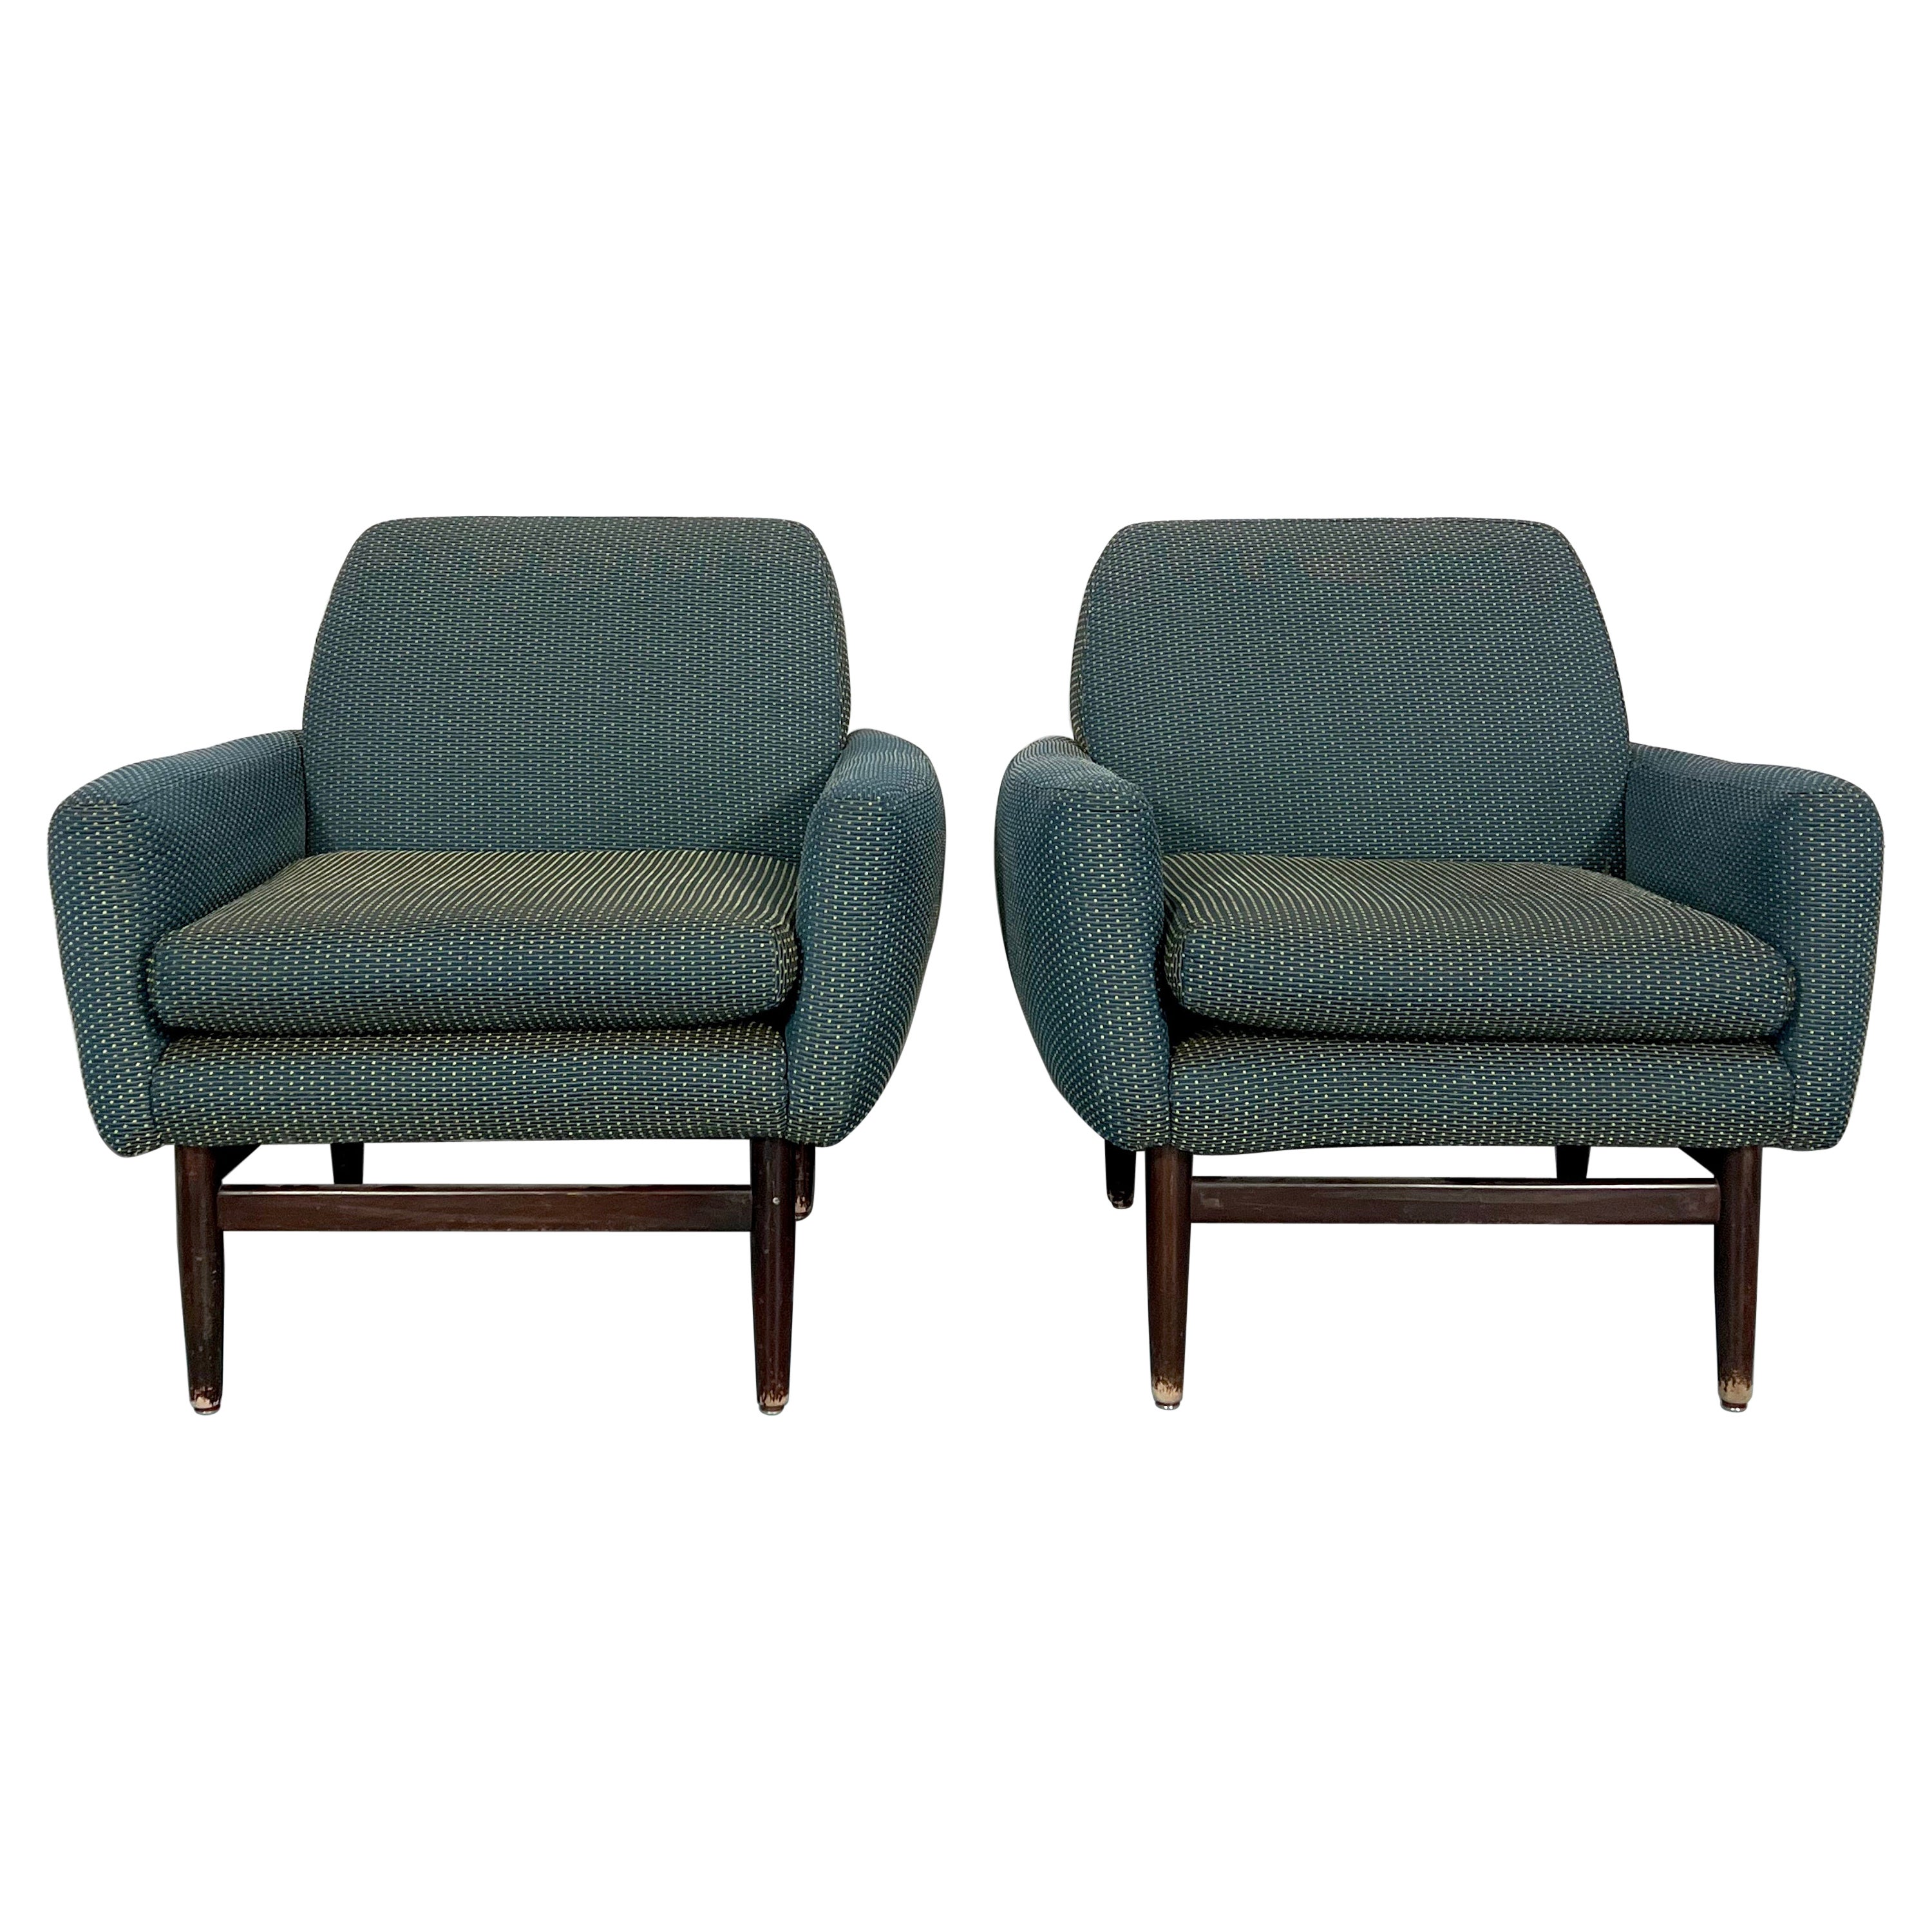 Italian Mid-century wood modern armchairs from 60s For Sale